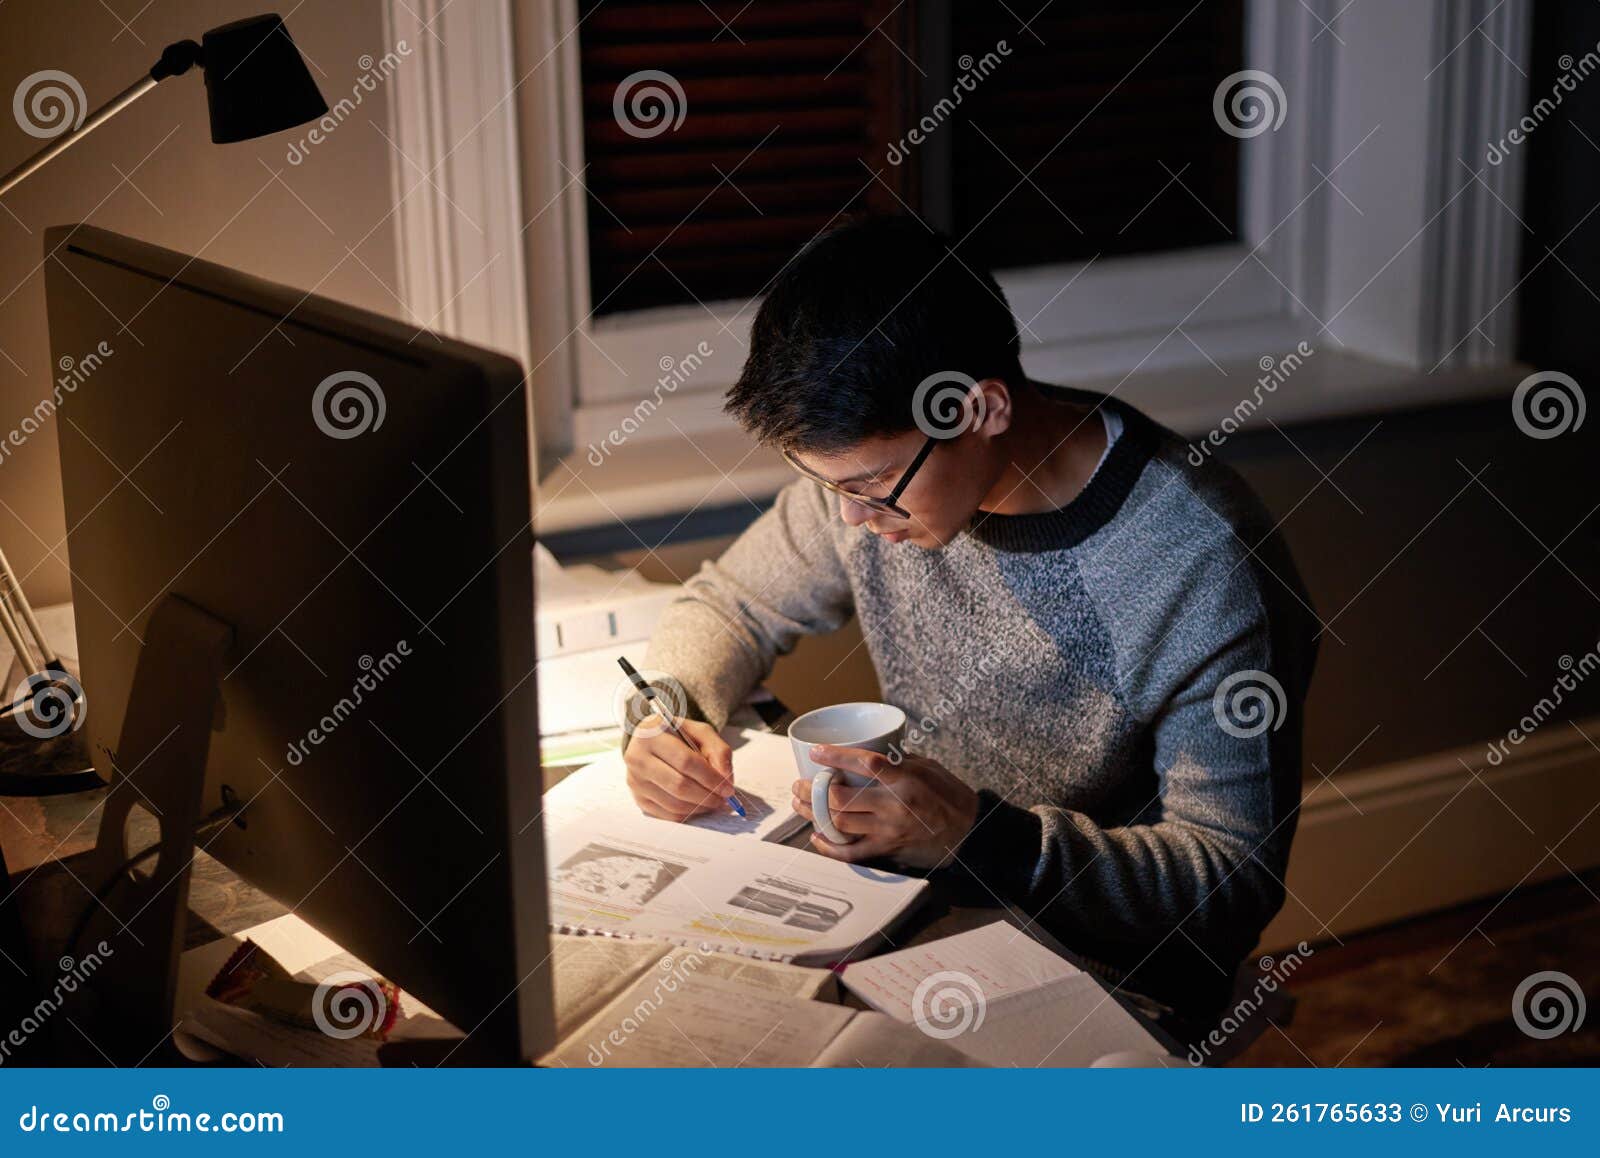 pulling an all nighter. a young student studying late into the night.